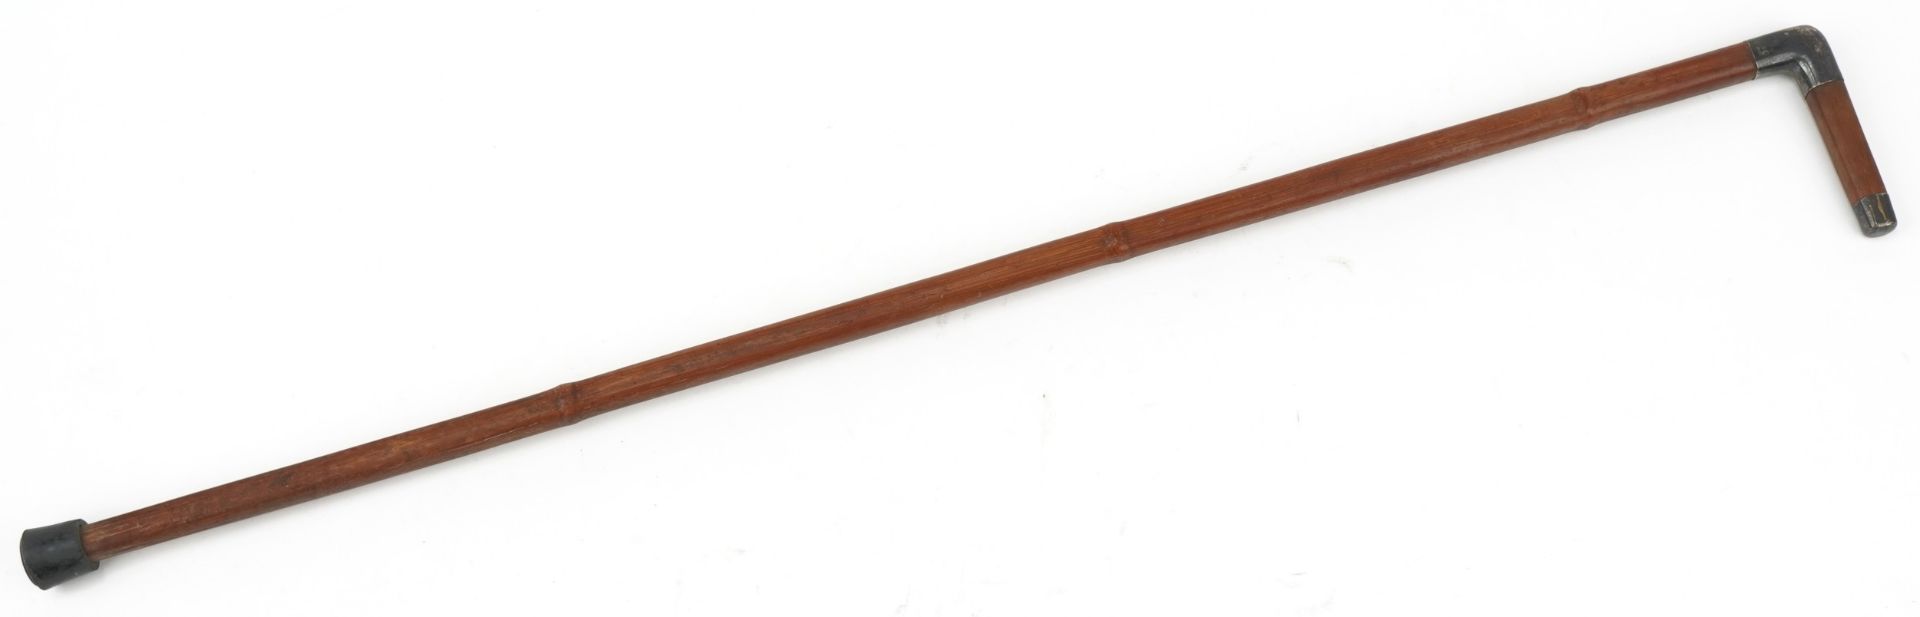 Brigg of London, Edwardian bamboo walking stick with silver mounts, 93cm in length : For further - Image 3 of 4